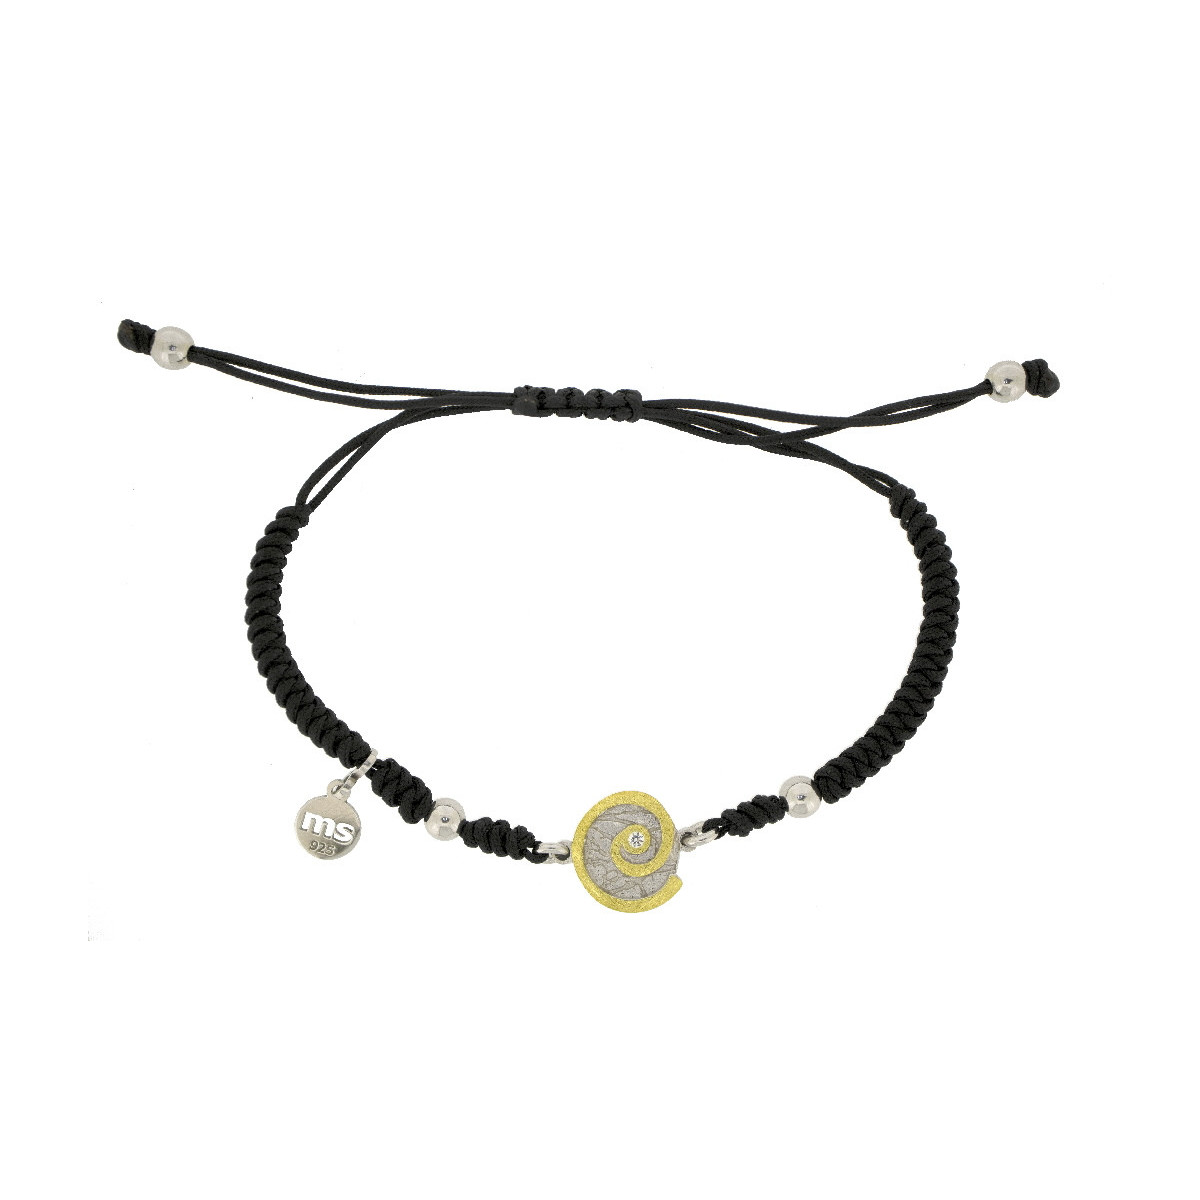 Silver, gold and 0.015 ct brilliant bracelet